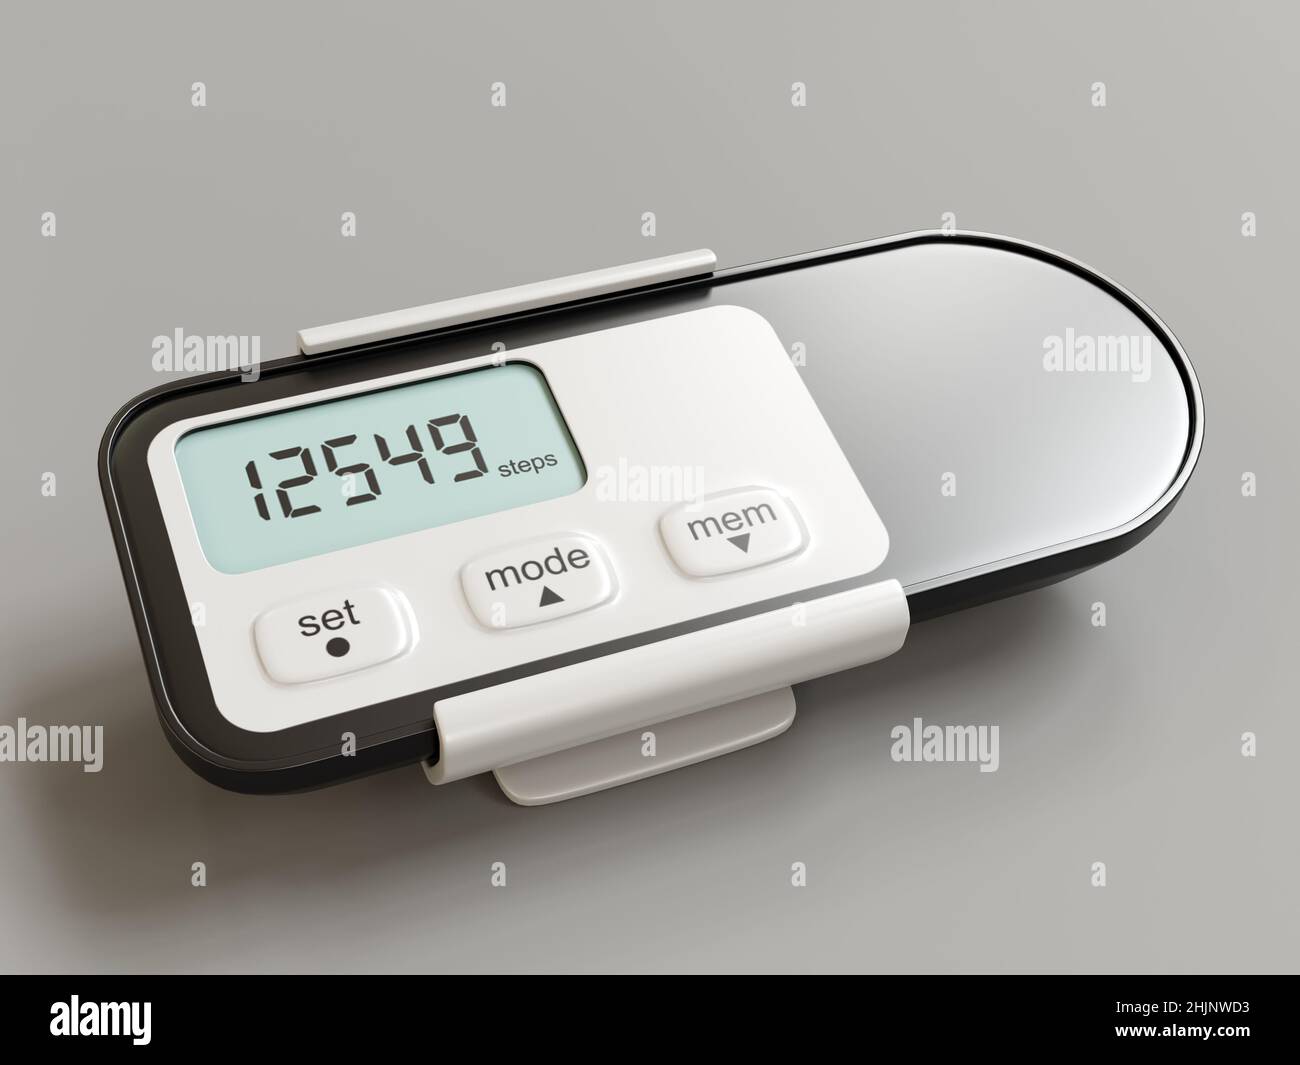 3D rendering of pedometer device shot on gray background Stock Photo